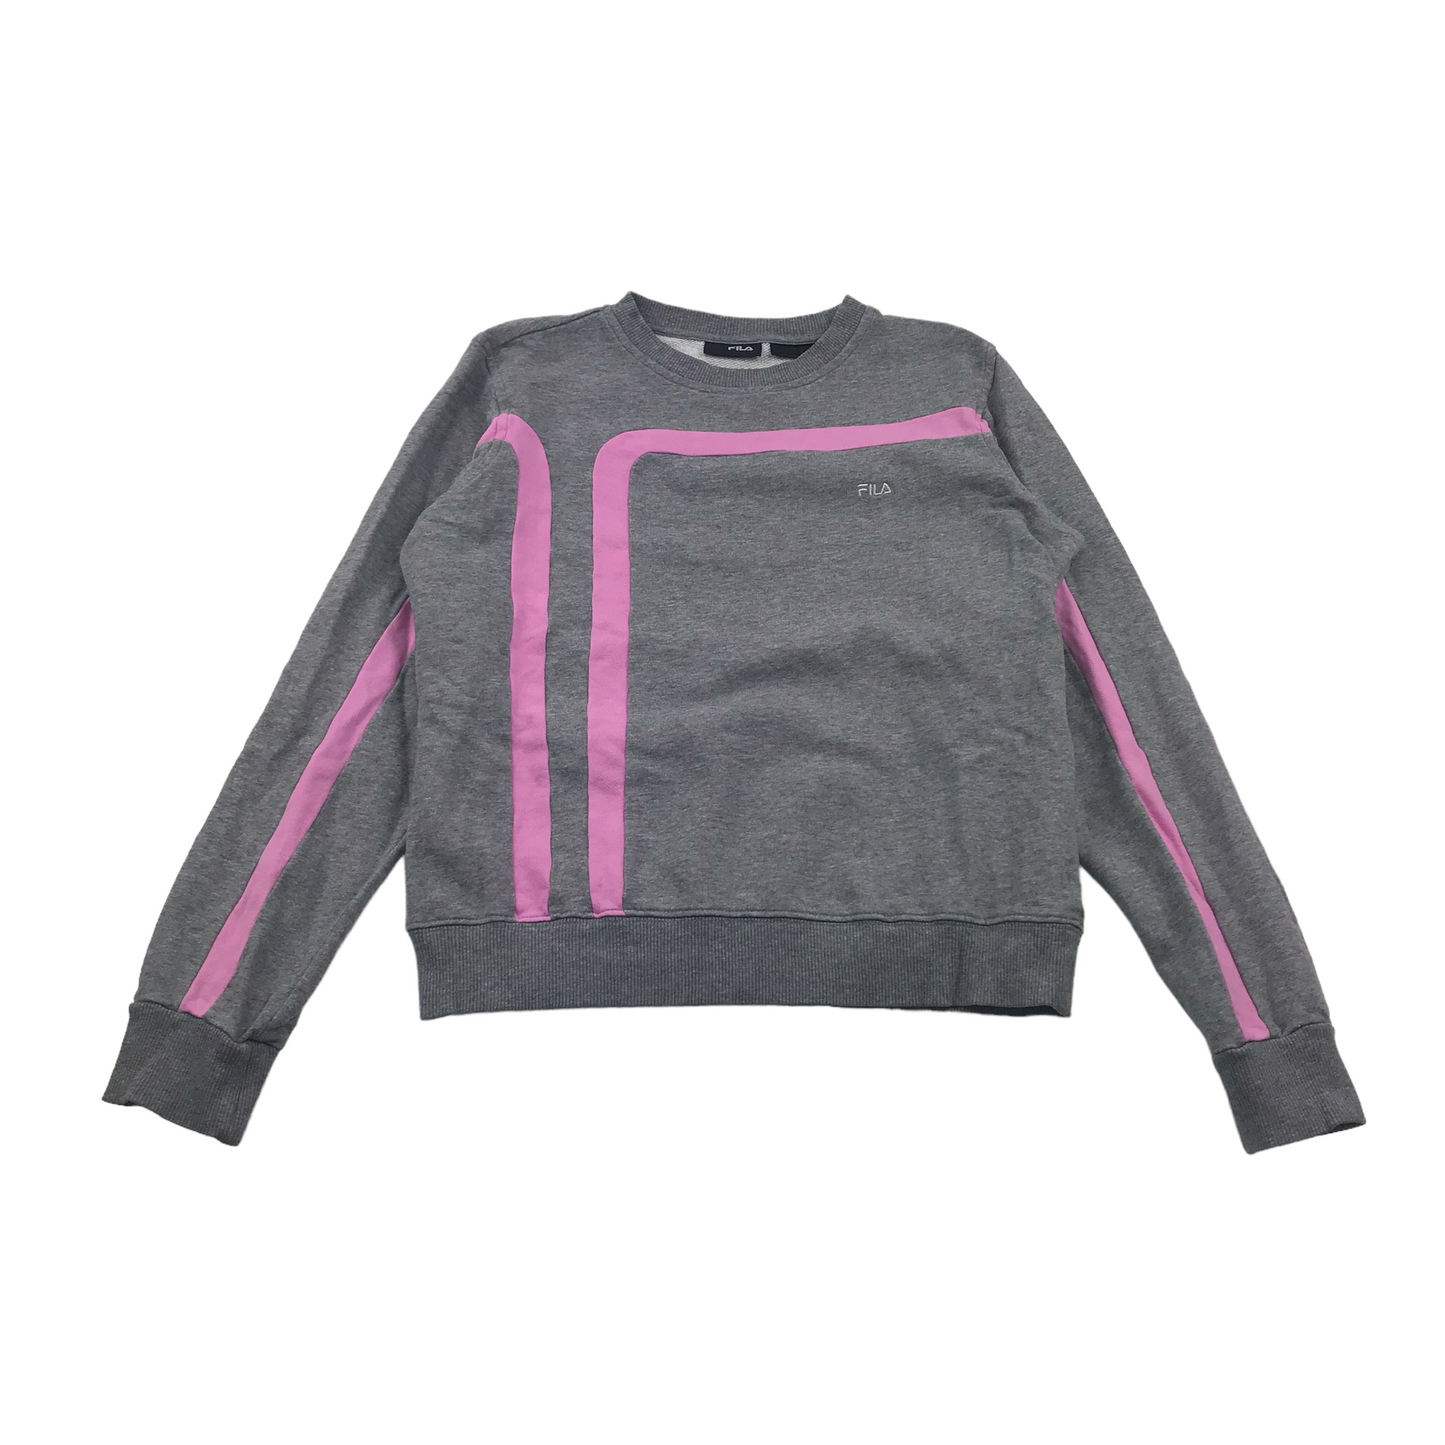 Fila Grey and Pink Sweater Jumper Women's Size 12